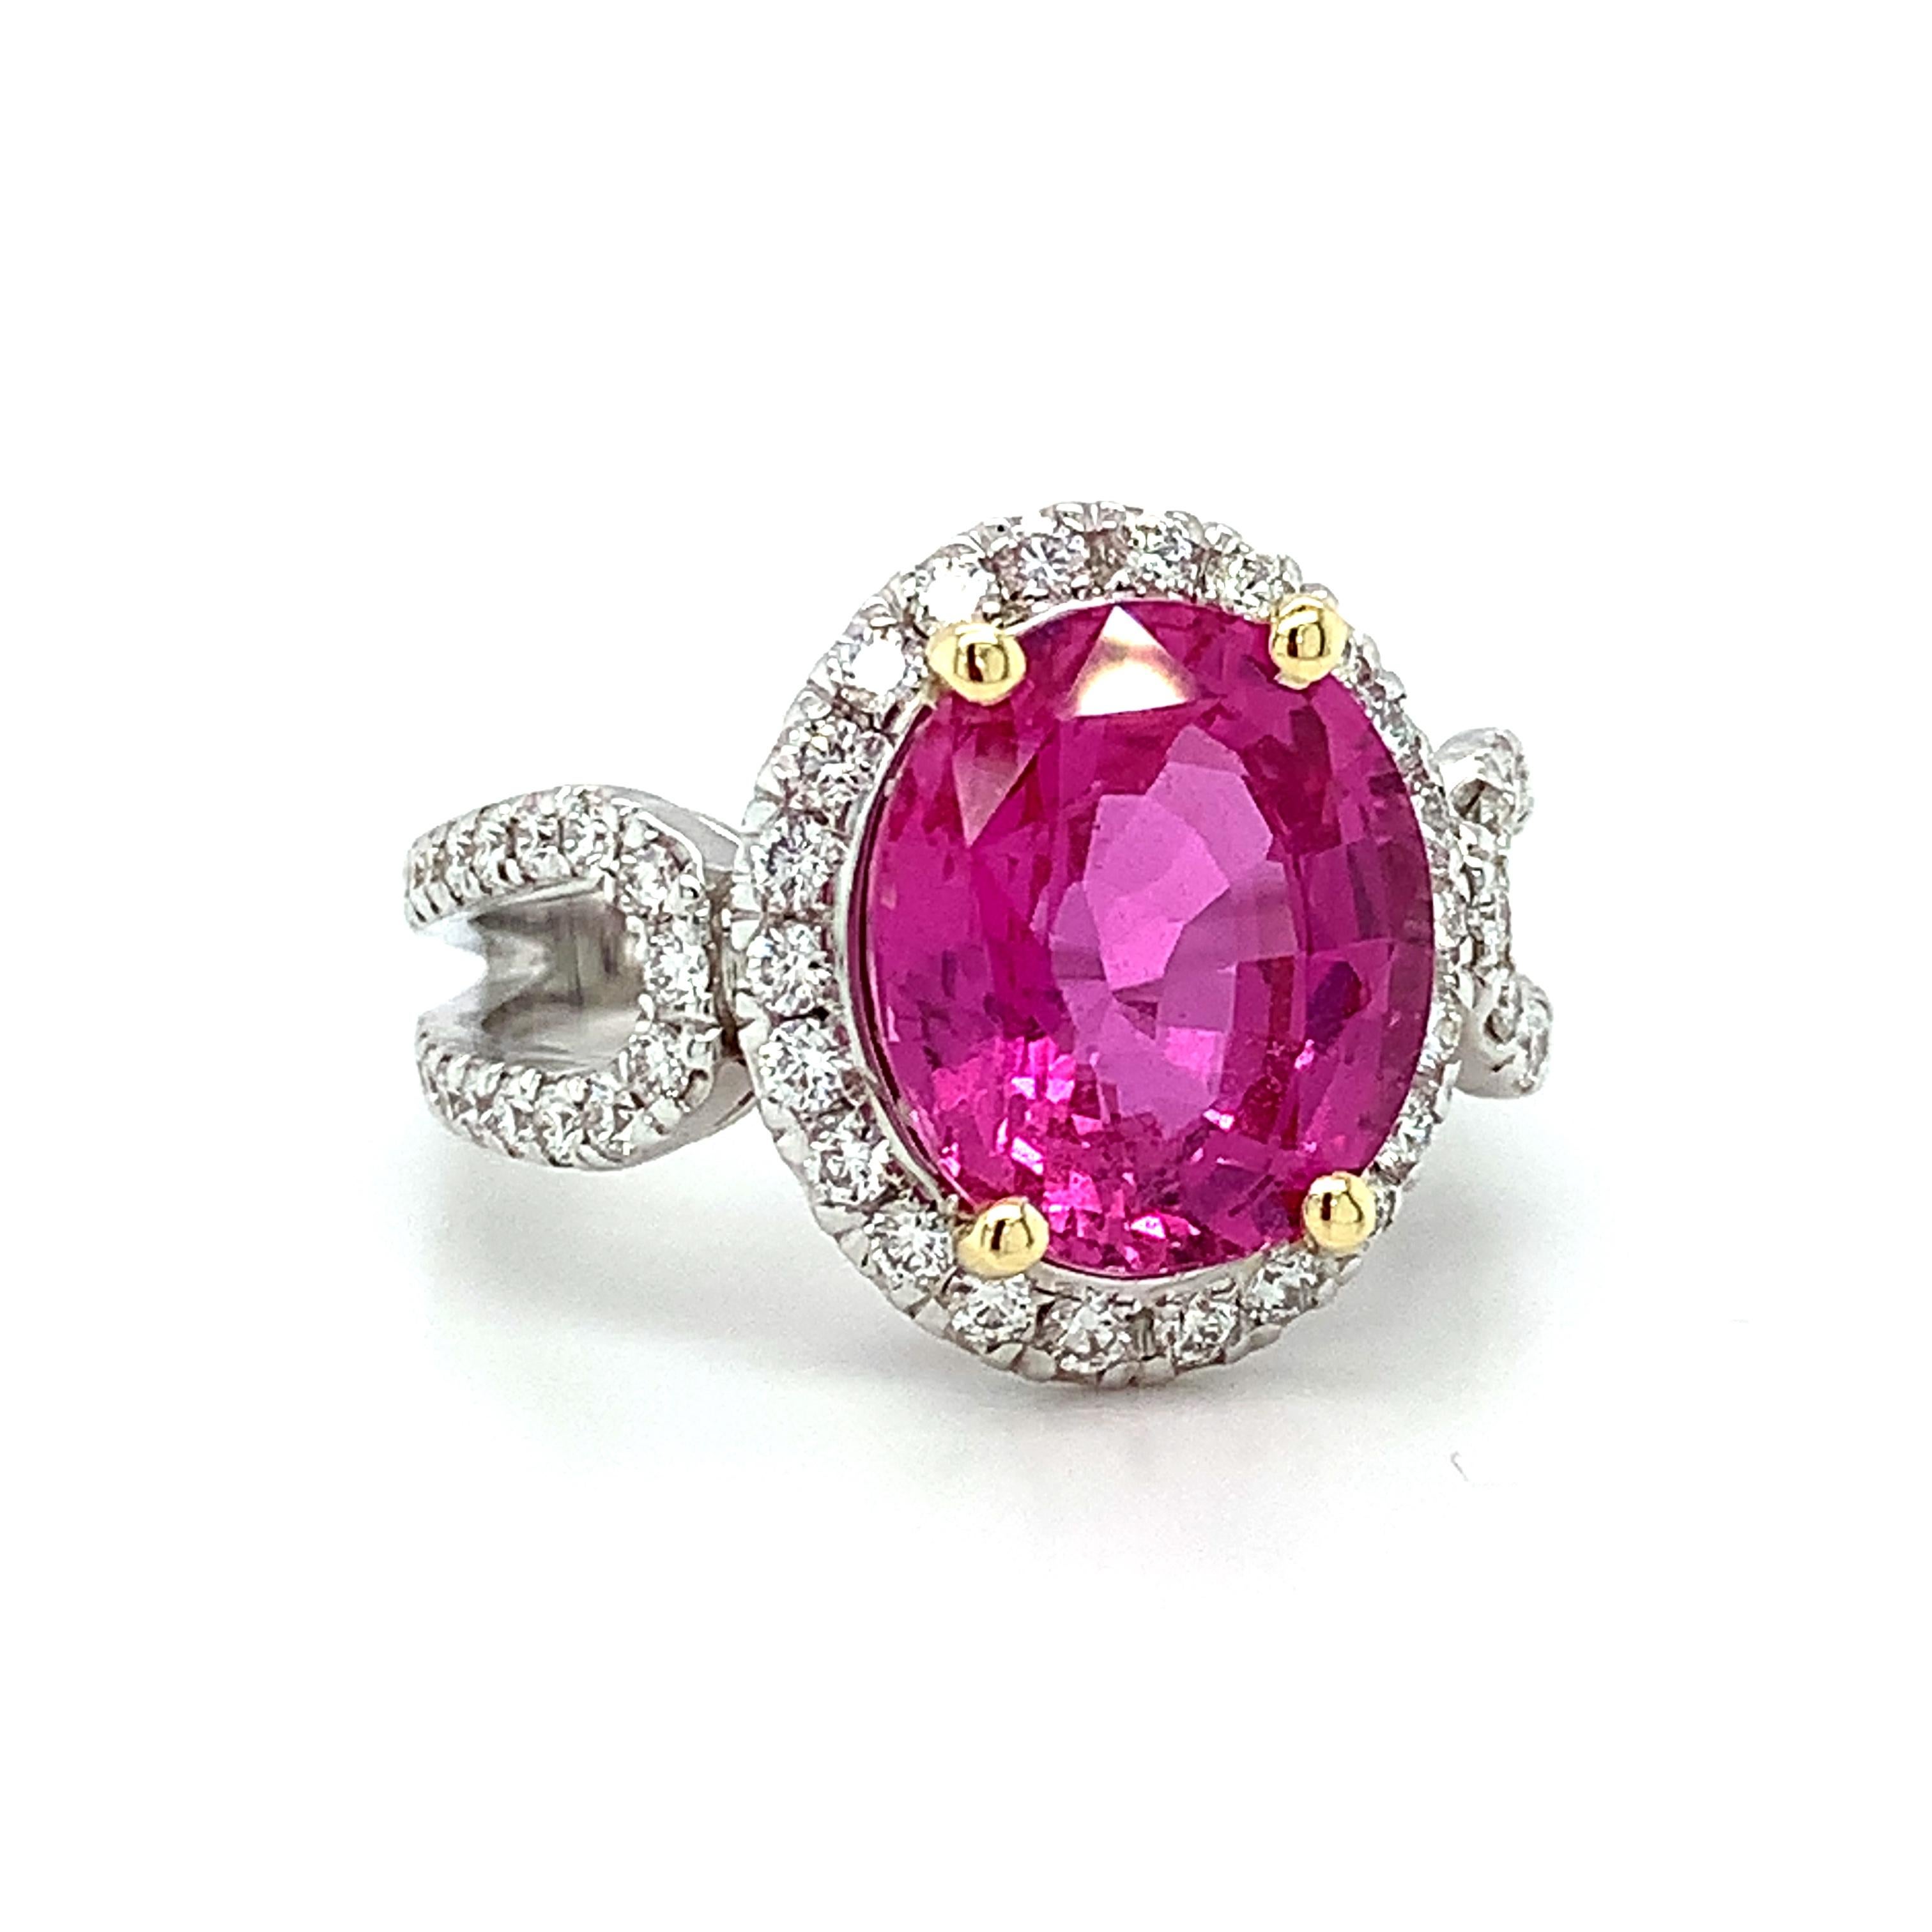 Oval Cut GIA Certified Unheated 5.73 Carat Pink Sapphire and Diamond Cocktail Ring For Sale